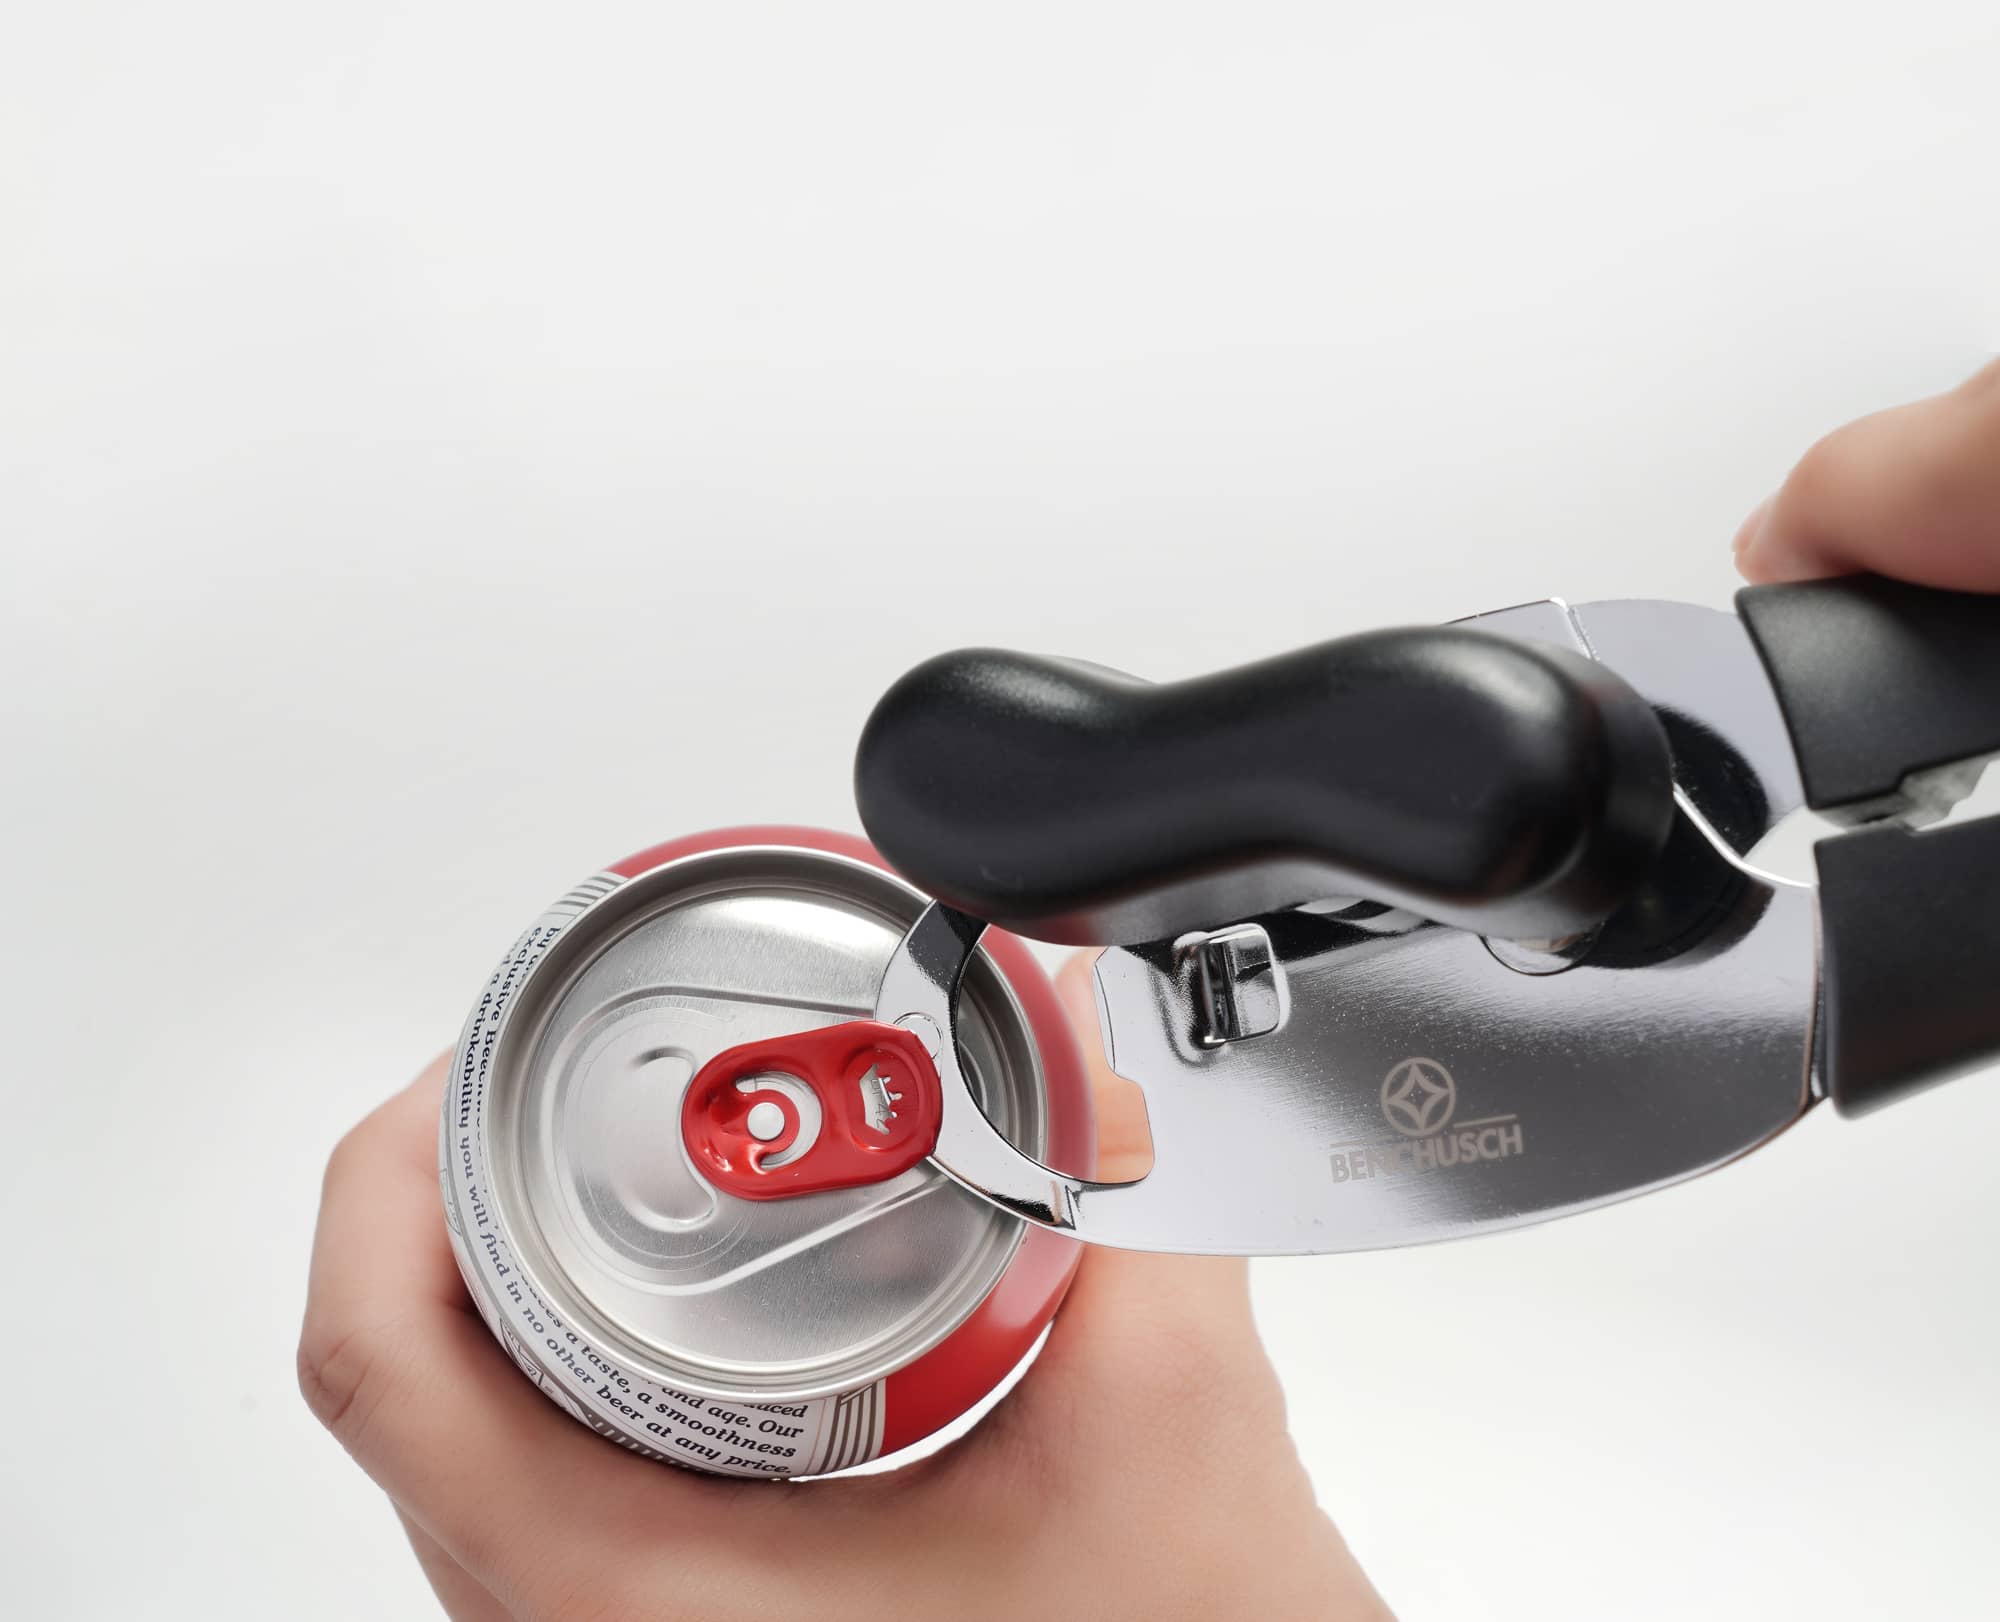 Prying the can lid with Benchusch Mordena Can Opener with Easy Turn Knob